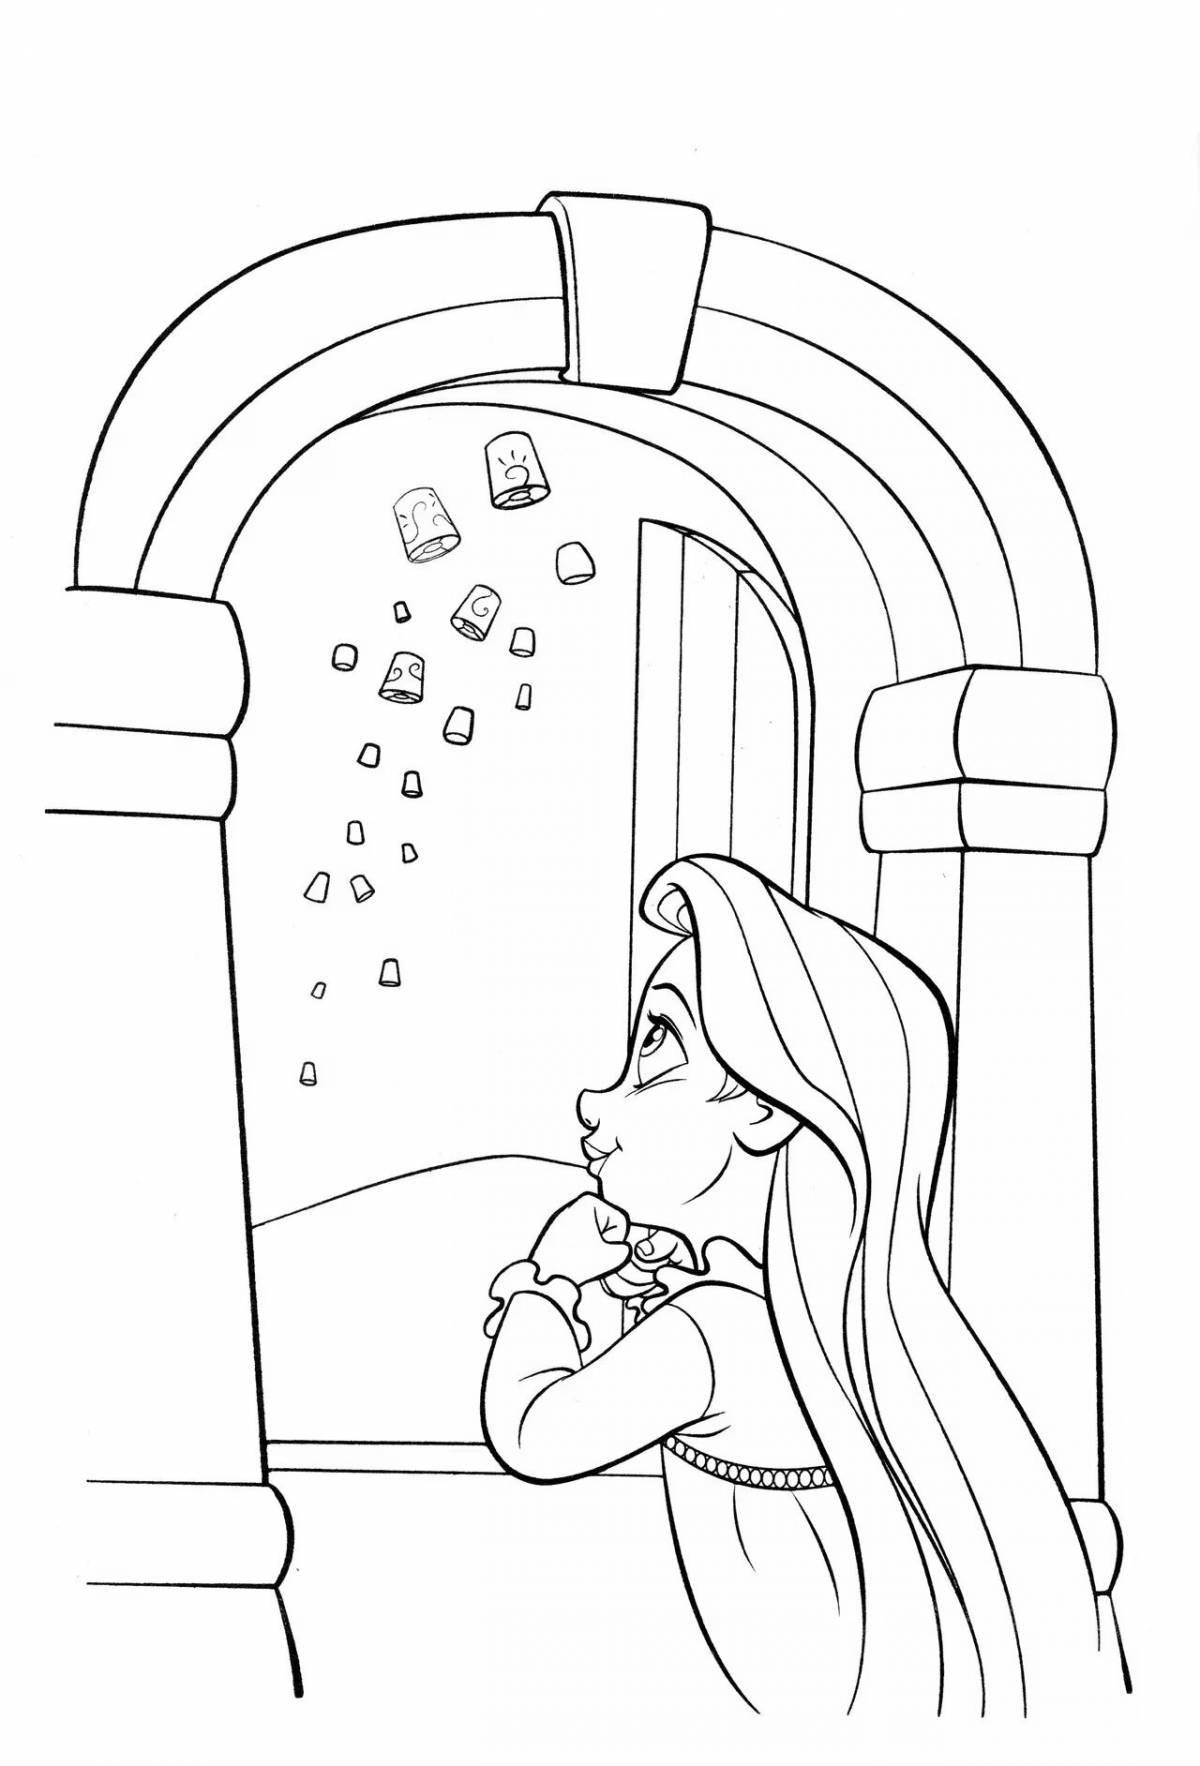 Tangled's amazing coloring game